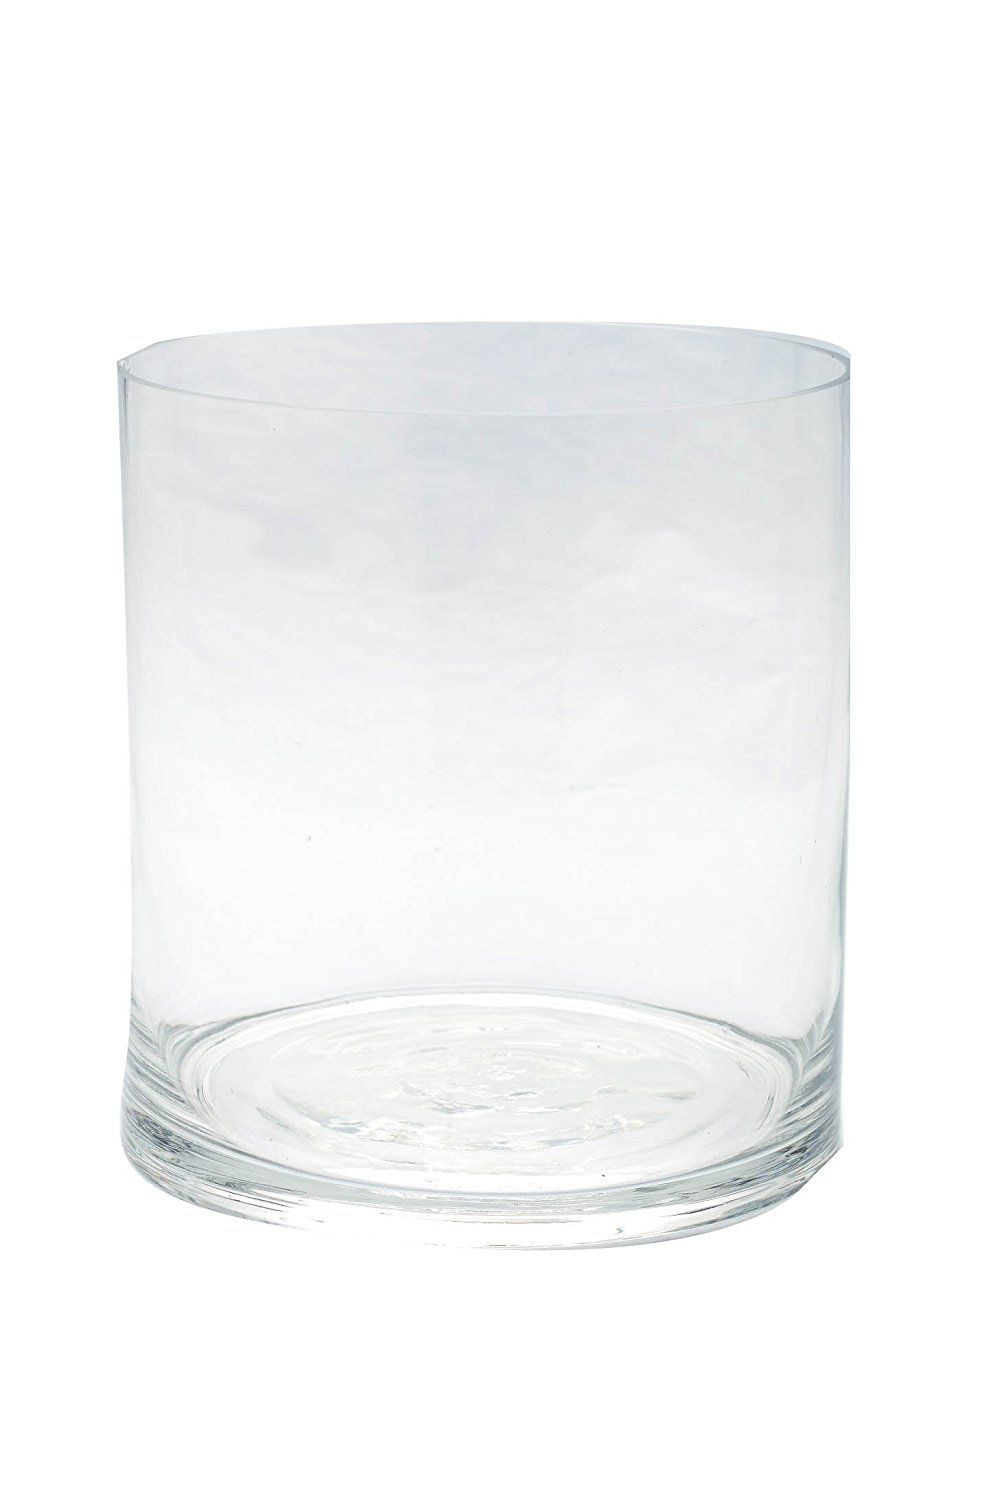 25 Stylish 10 Inch Clear Glass Vases 2024 free download 10 inch clear glass vases of diamond star glass 84010c clear cylinder 9 by 10 want within diamond star glass 84010c clear cylinder 9 by 10 want